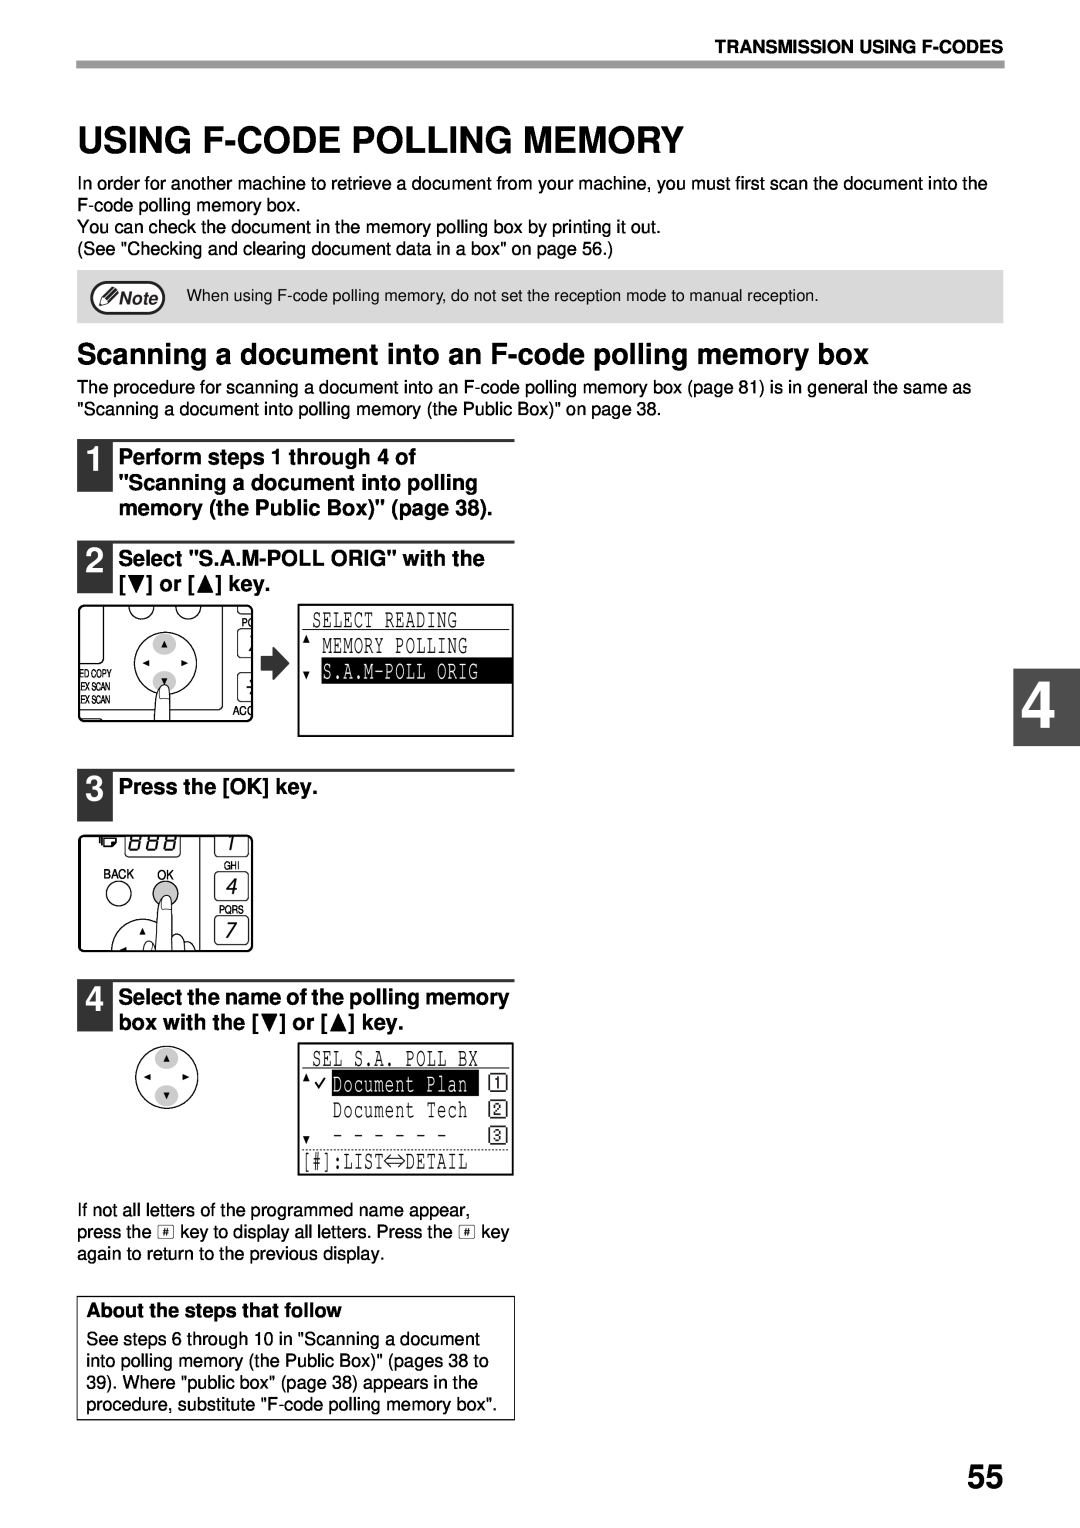 Sharp MX-FX13 appendix Using F-Code Polling Memory, Scanning a document into an F-code polling memory box, S.A.M-Poll Orig 